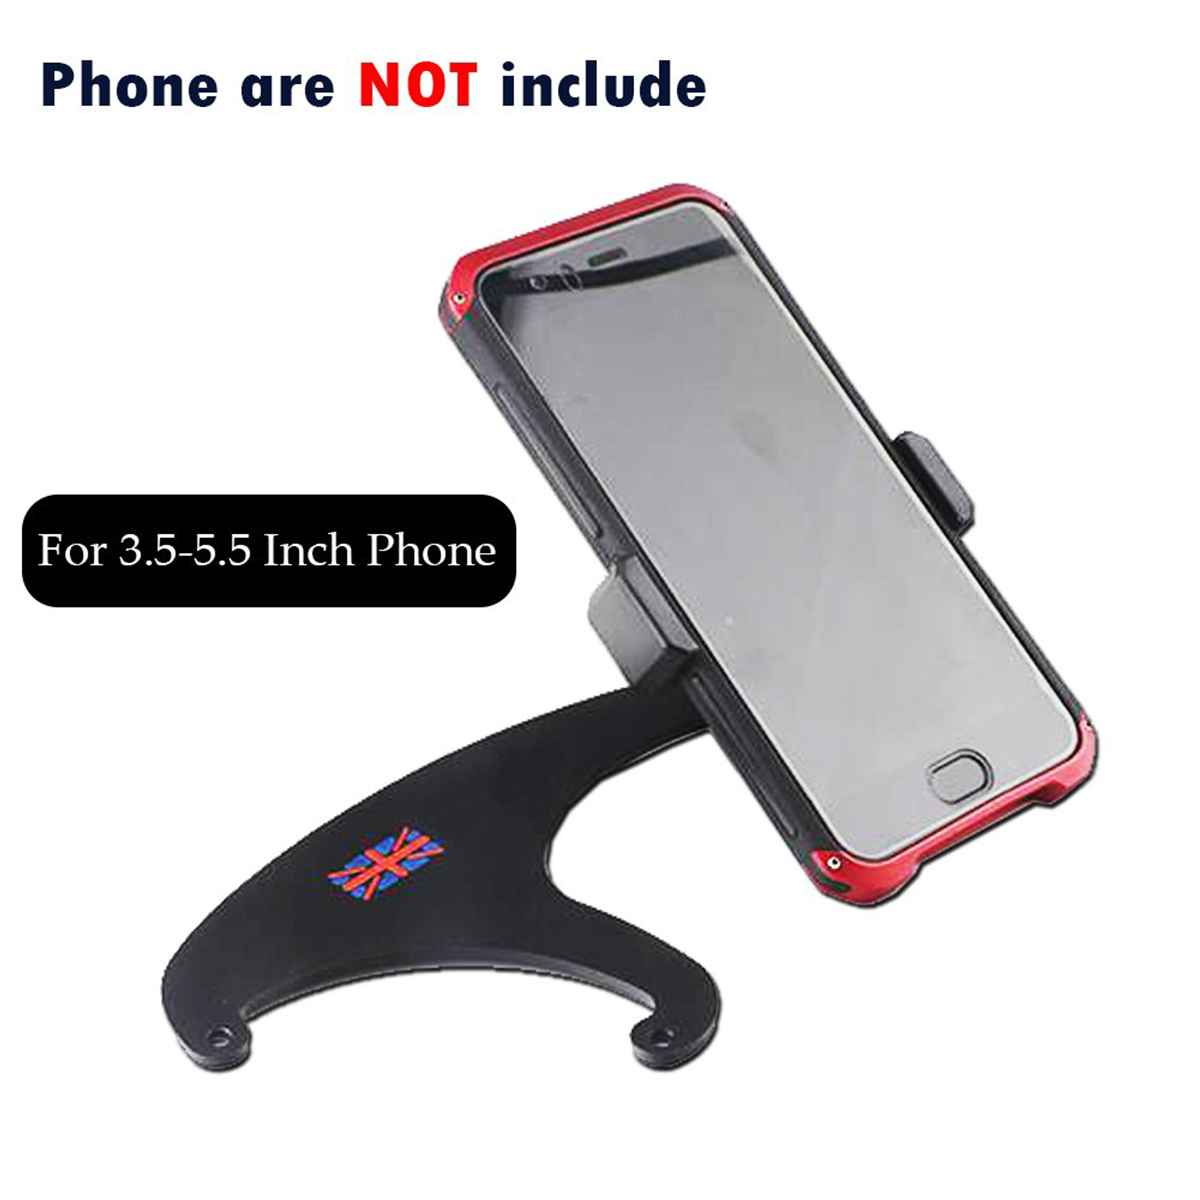 Bakeey-360deg-Rotation-Car-Phone-Mount-Cradle-Holder-Stand-for-Mini-Cooper-R60R61-F54F55F56-R55R56-F-1633190-8